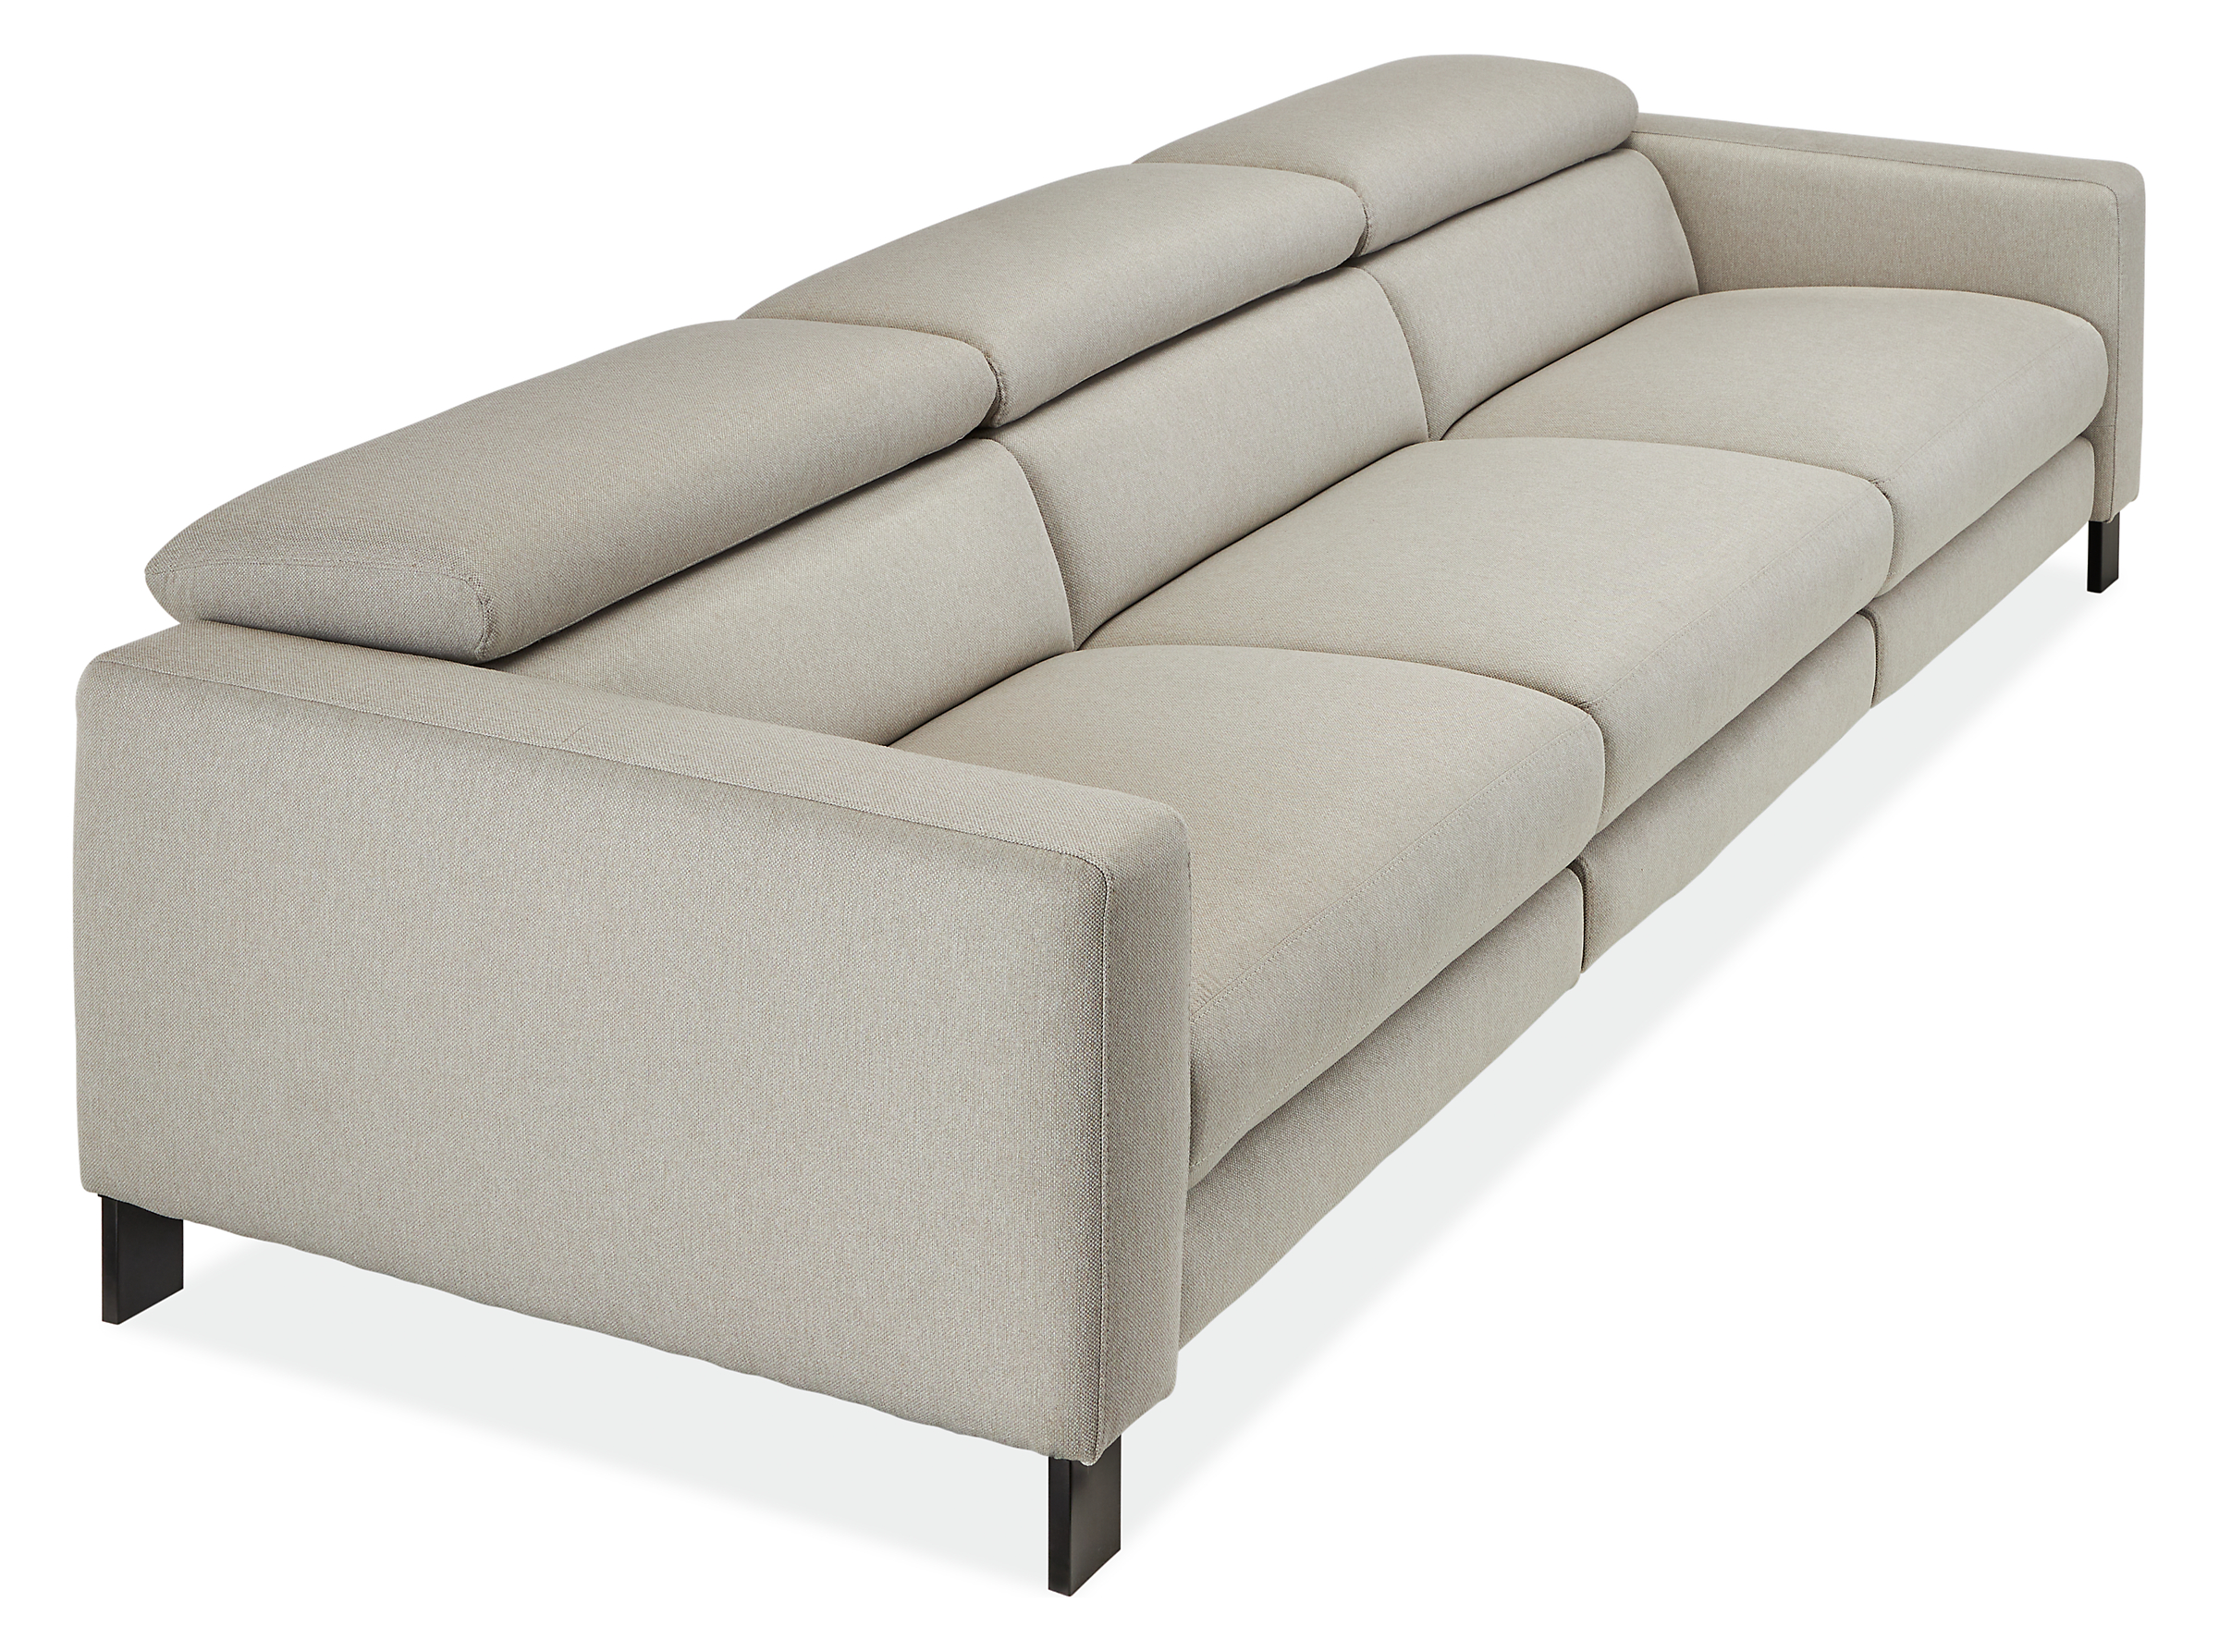 detail of gray Elio sofa with no footrests or headrests extended.